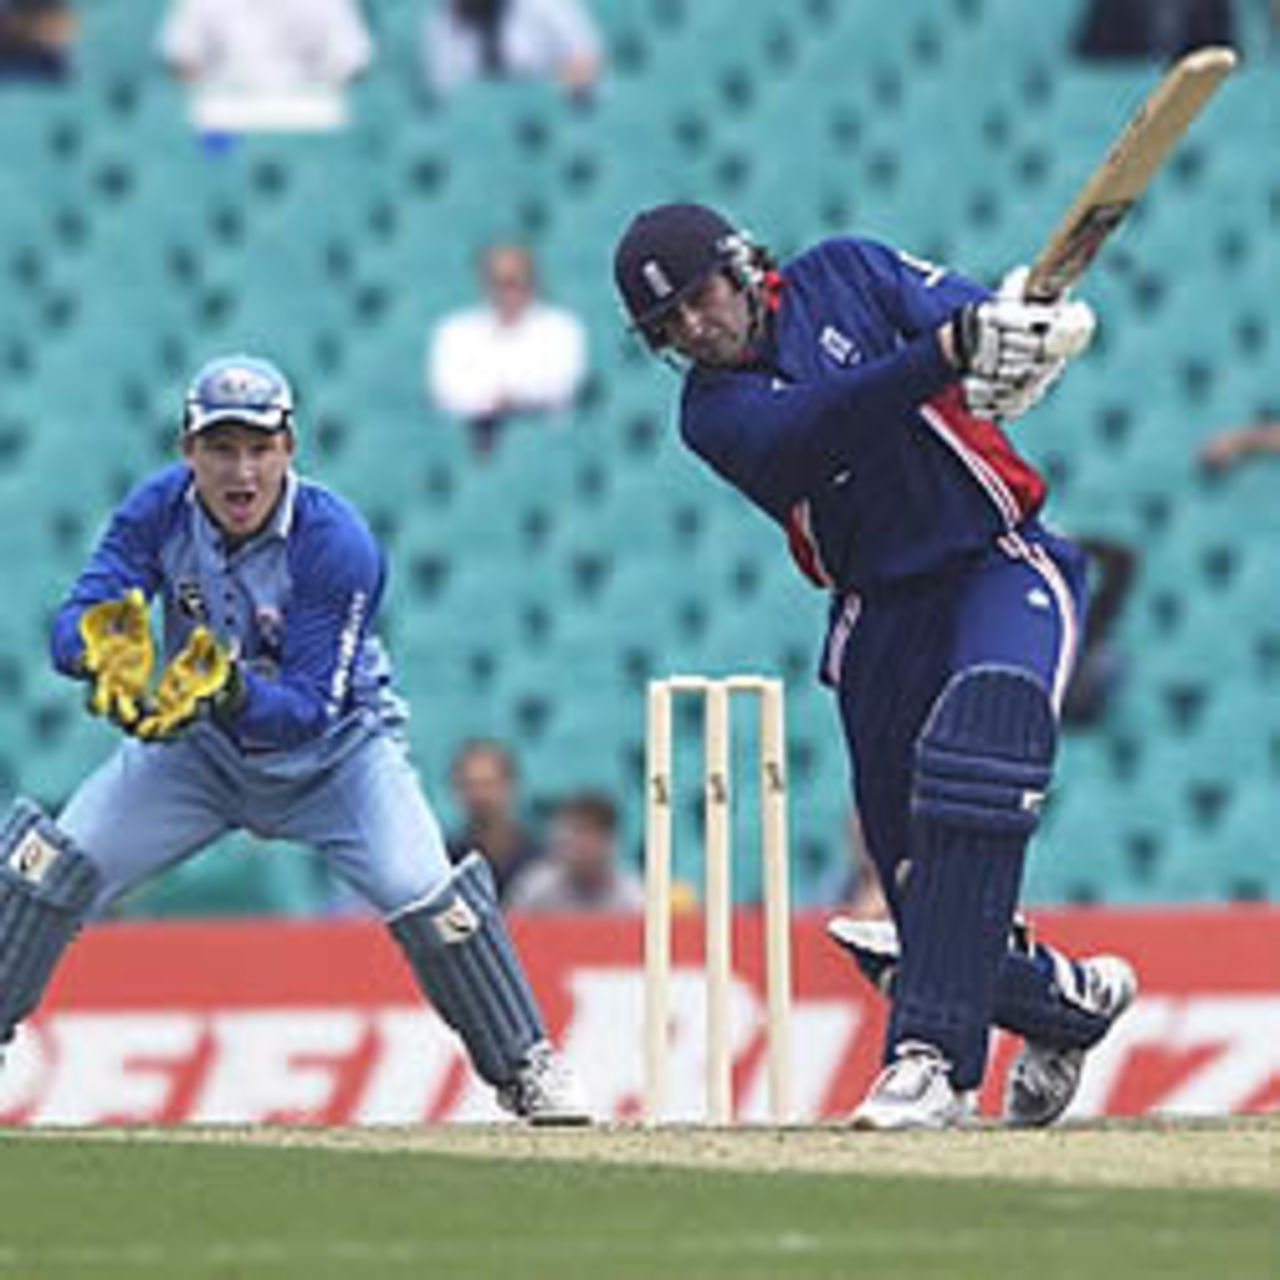 SYDNEY - DECEMBER 6: Ronnie Irani of England hits out during the one day match between the New South Wales Blues and England at the Sydney Cricket Ground in Sydney, Australia on December 6, 2002.